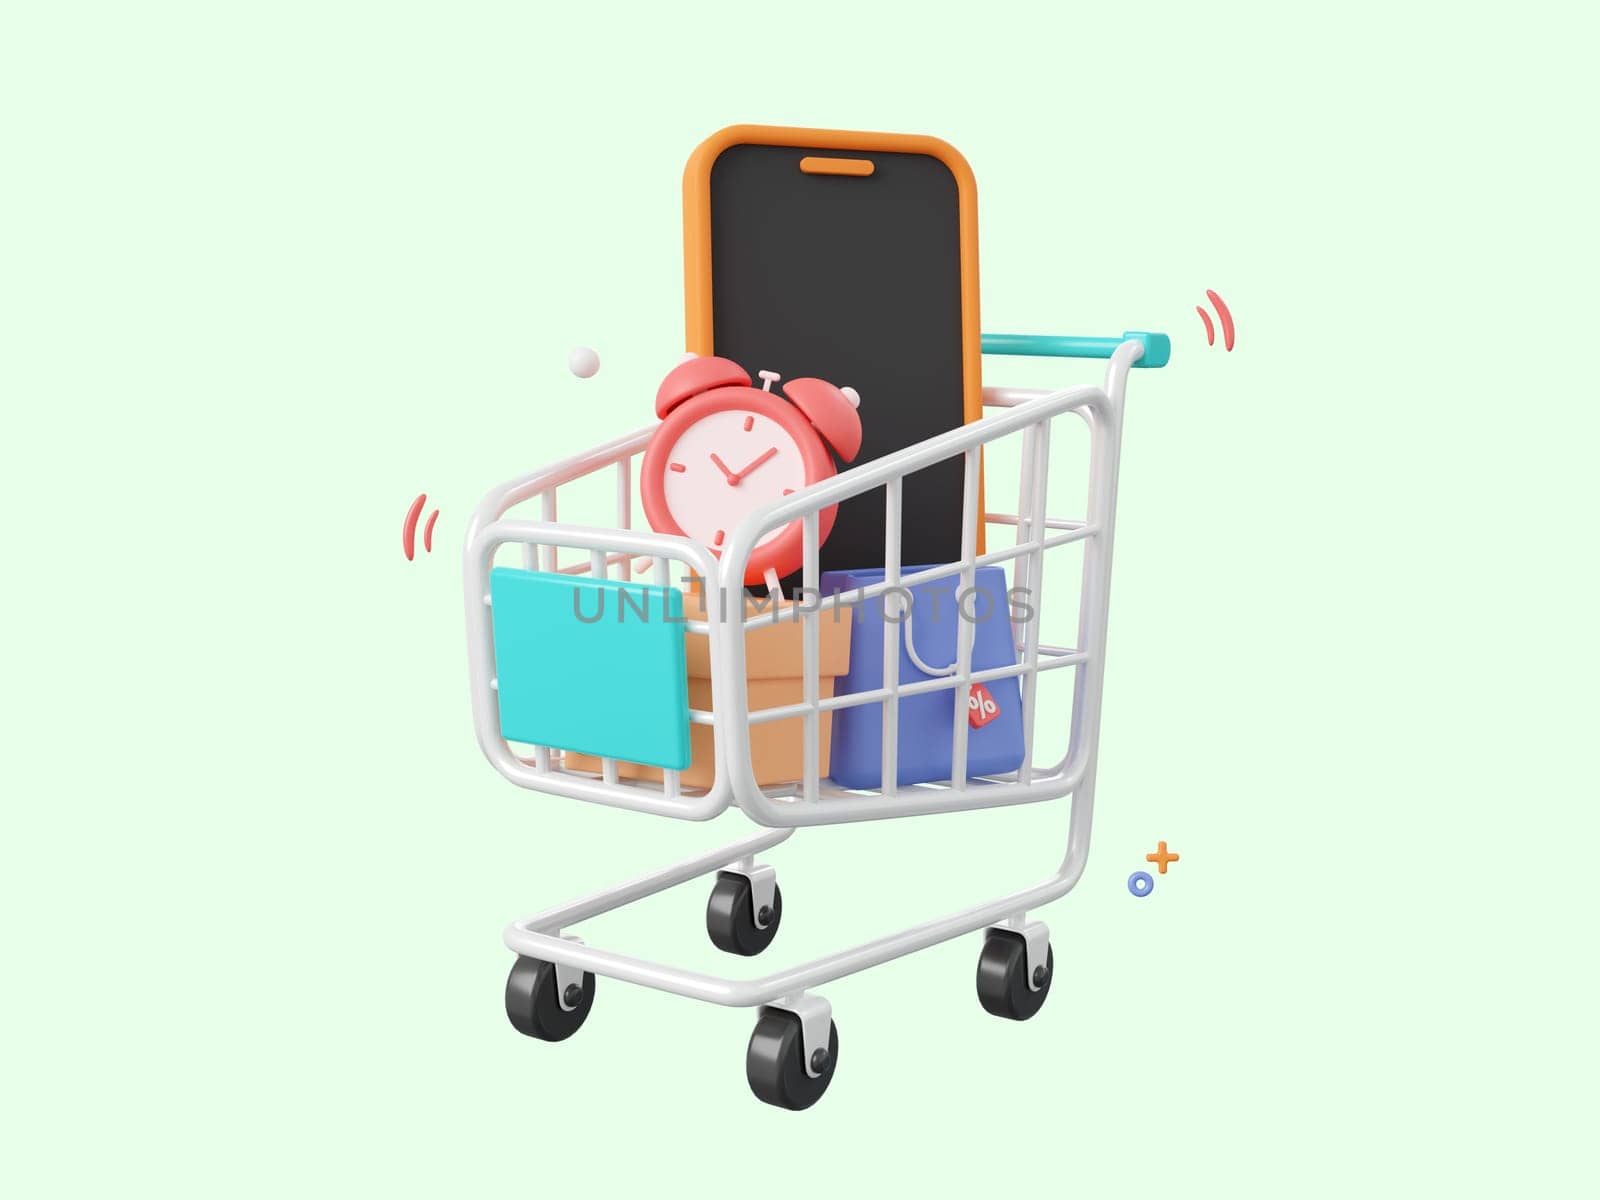 3d cartoon design illustration of Smartphone in shopping cart with parcel box, shopping bag and alarm clock, Shopping online on mobile concept. by nutzchotwarut